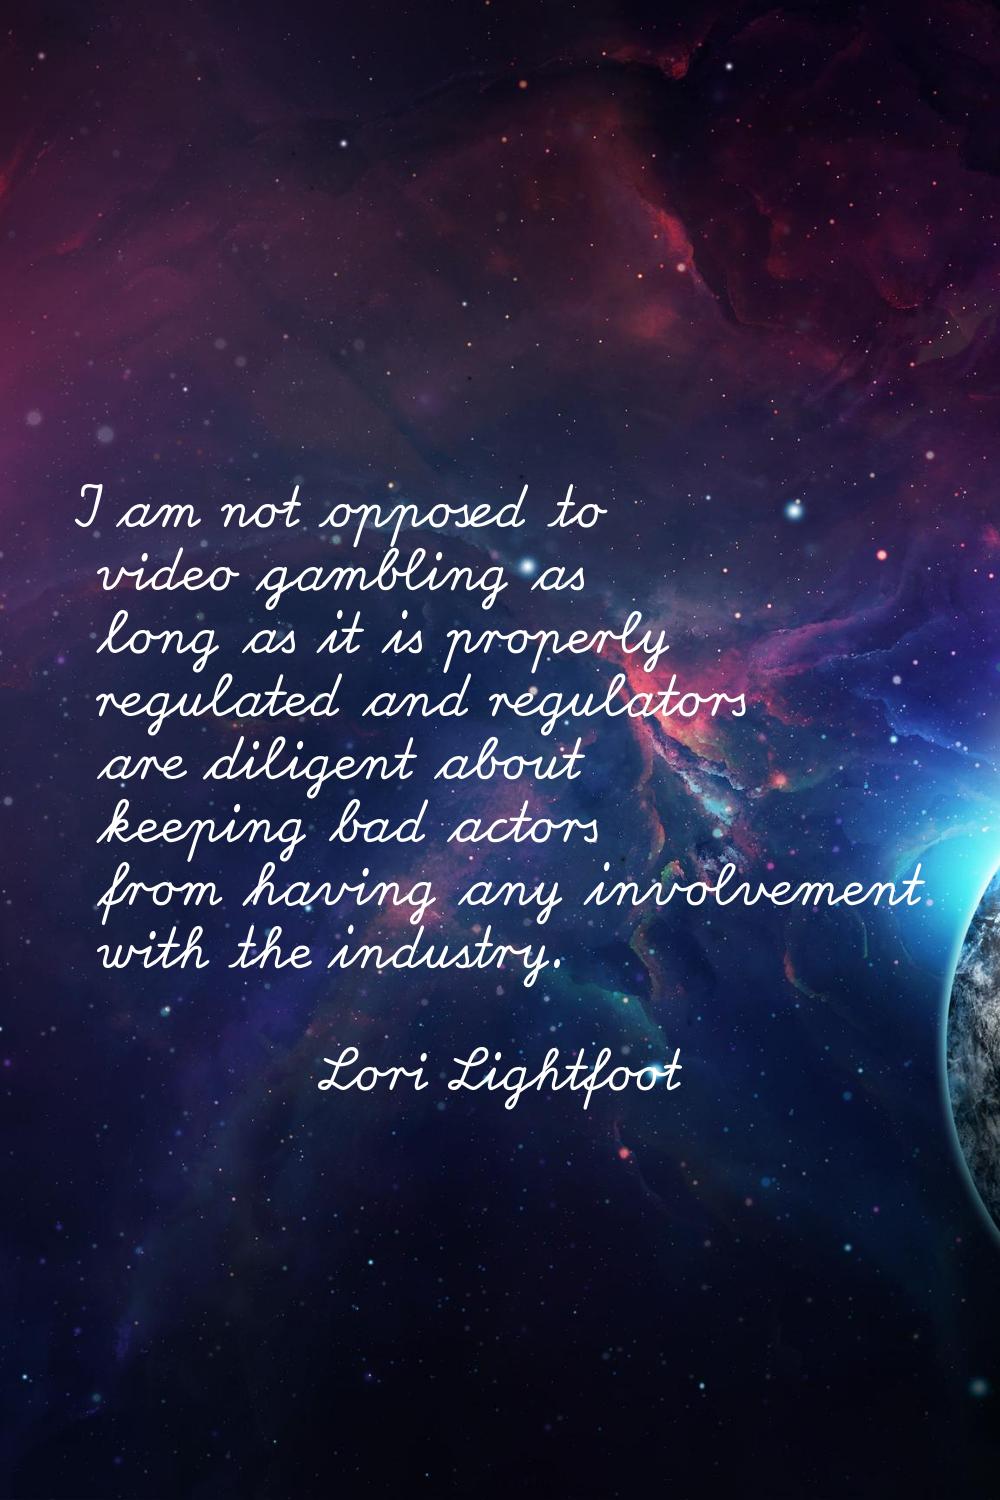 I am not opposed to video gambling as long as it is properly regulated and regulators are diligent 